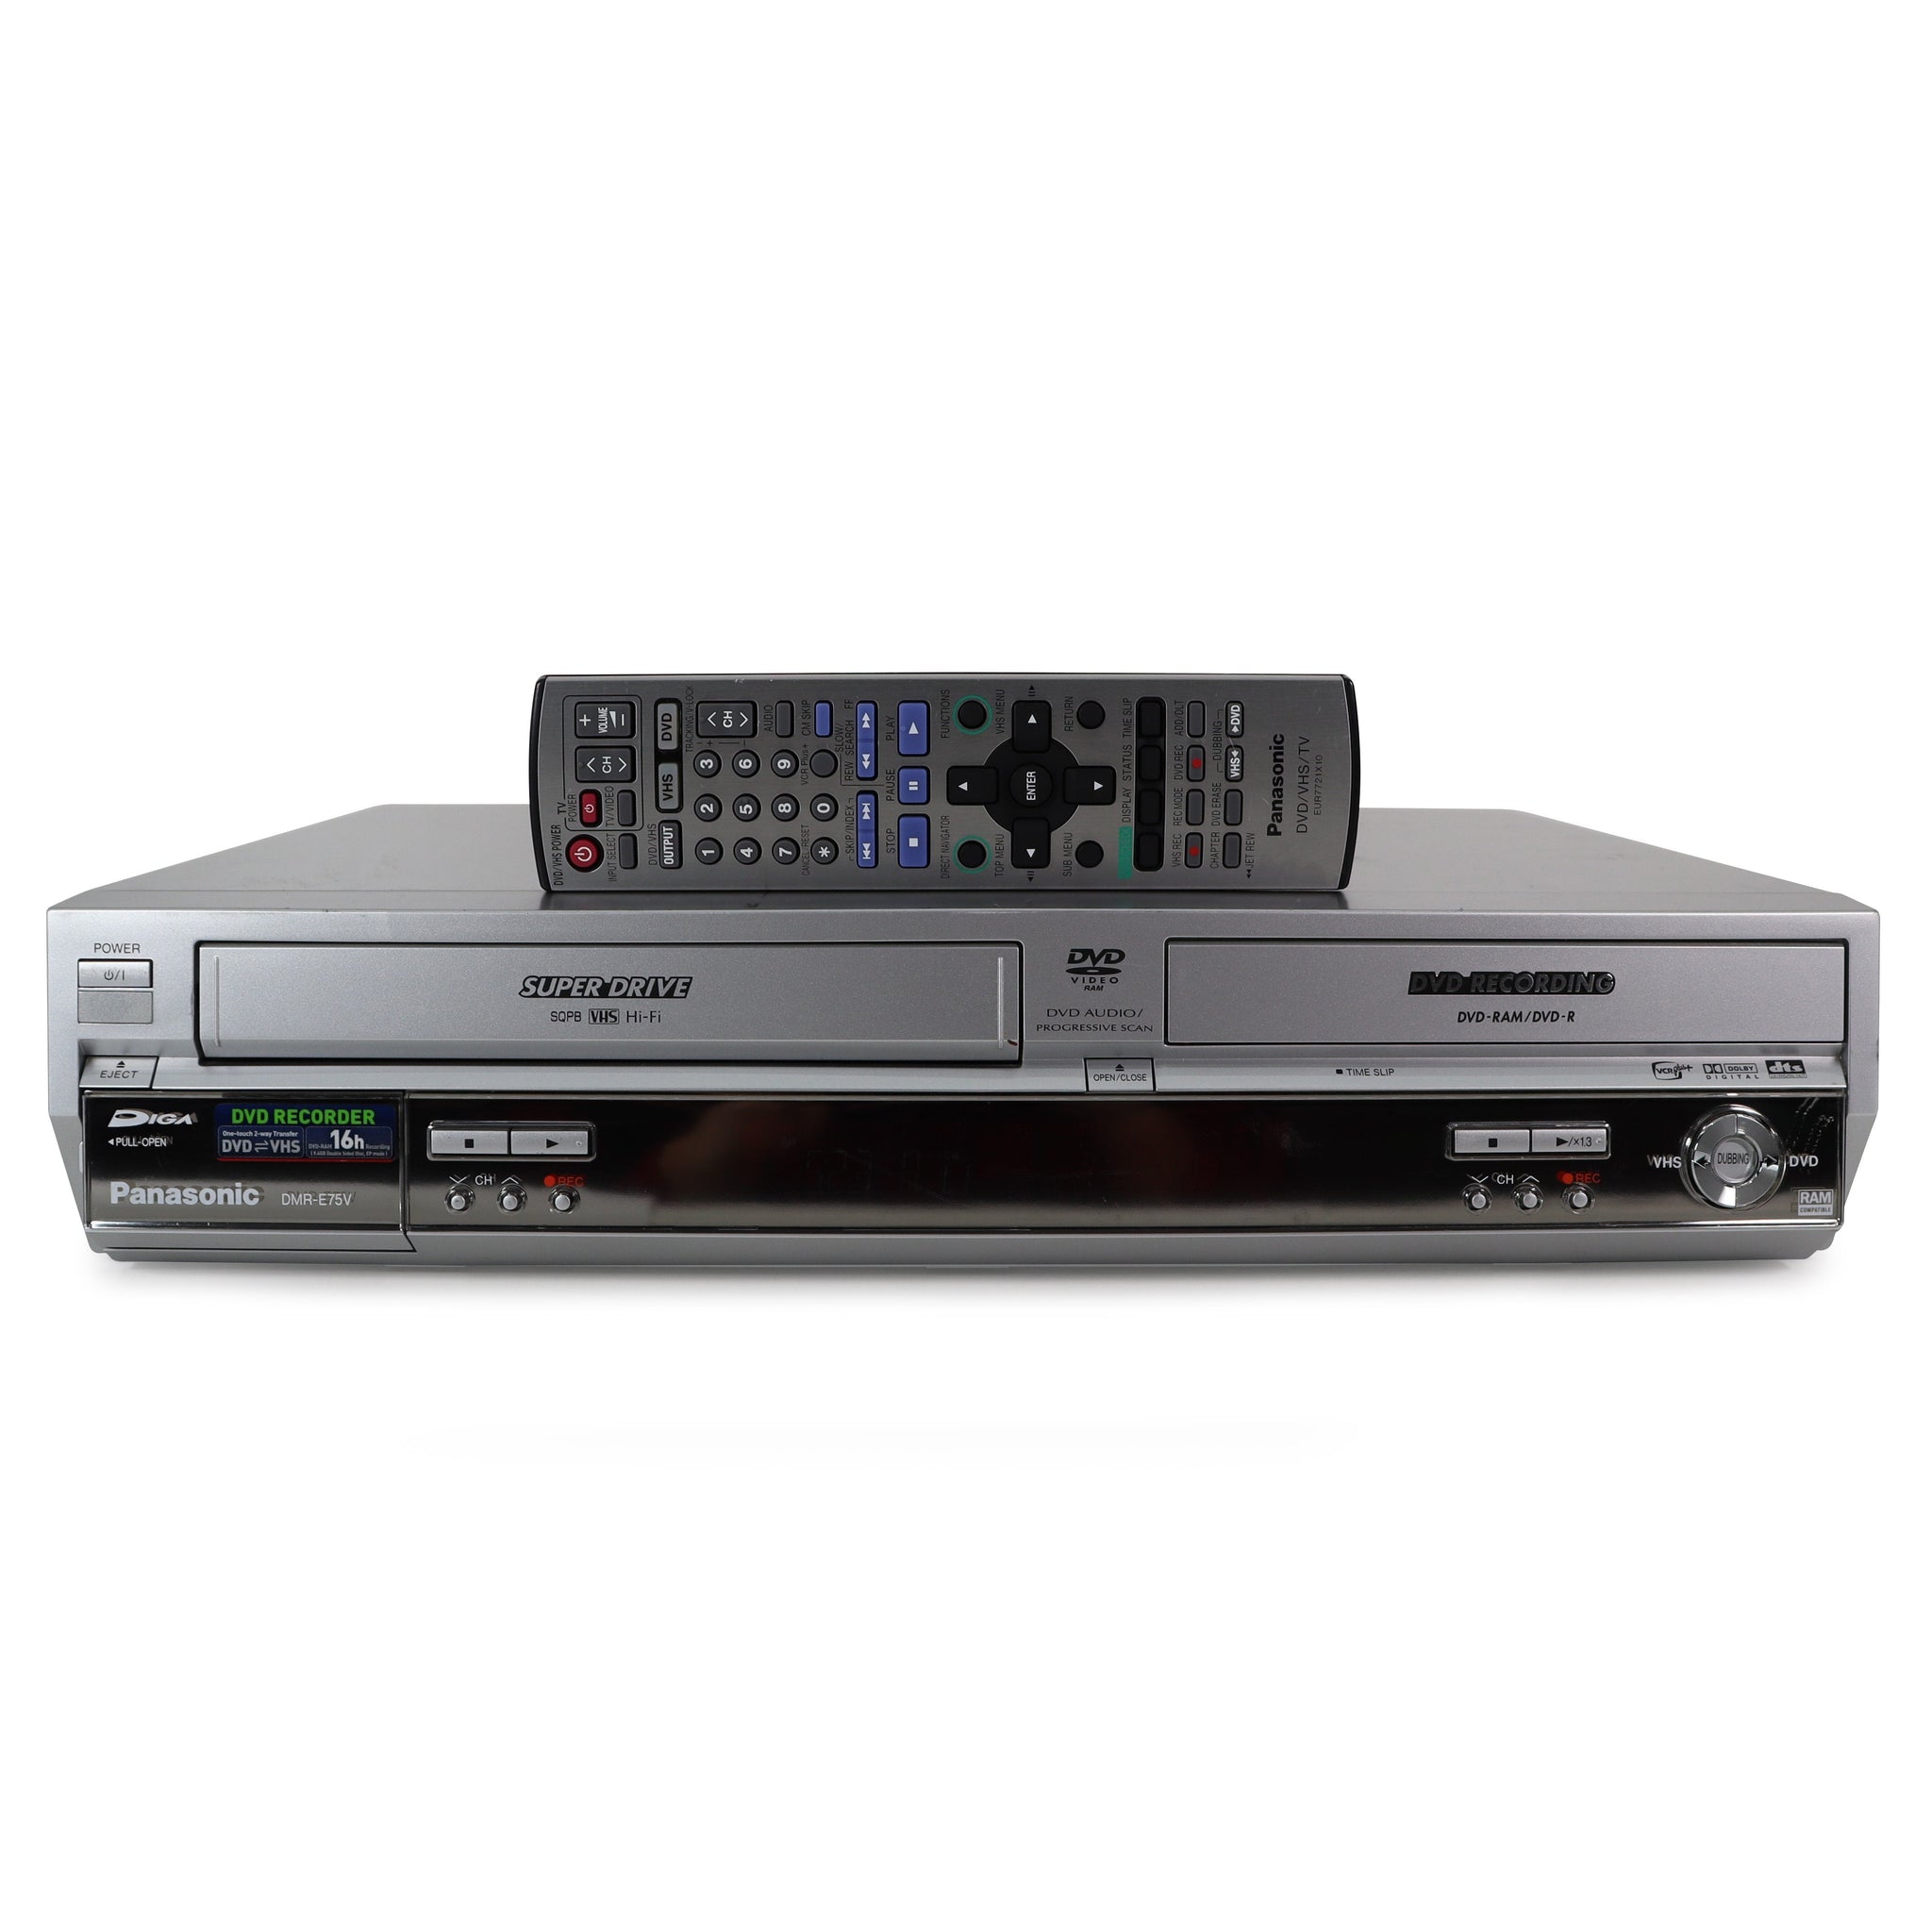 VHS TO DVD Recorder Converter 2-in-1 + Convert your VHS tapes to DVD